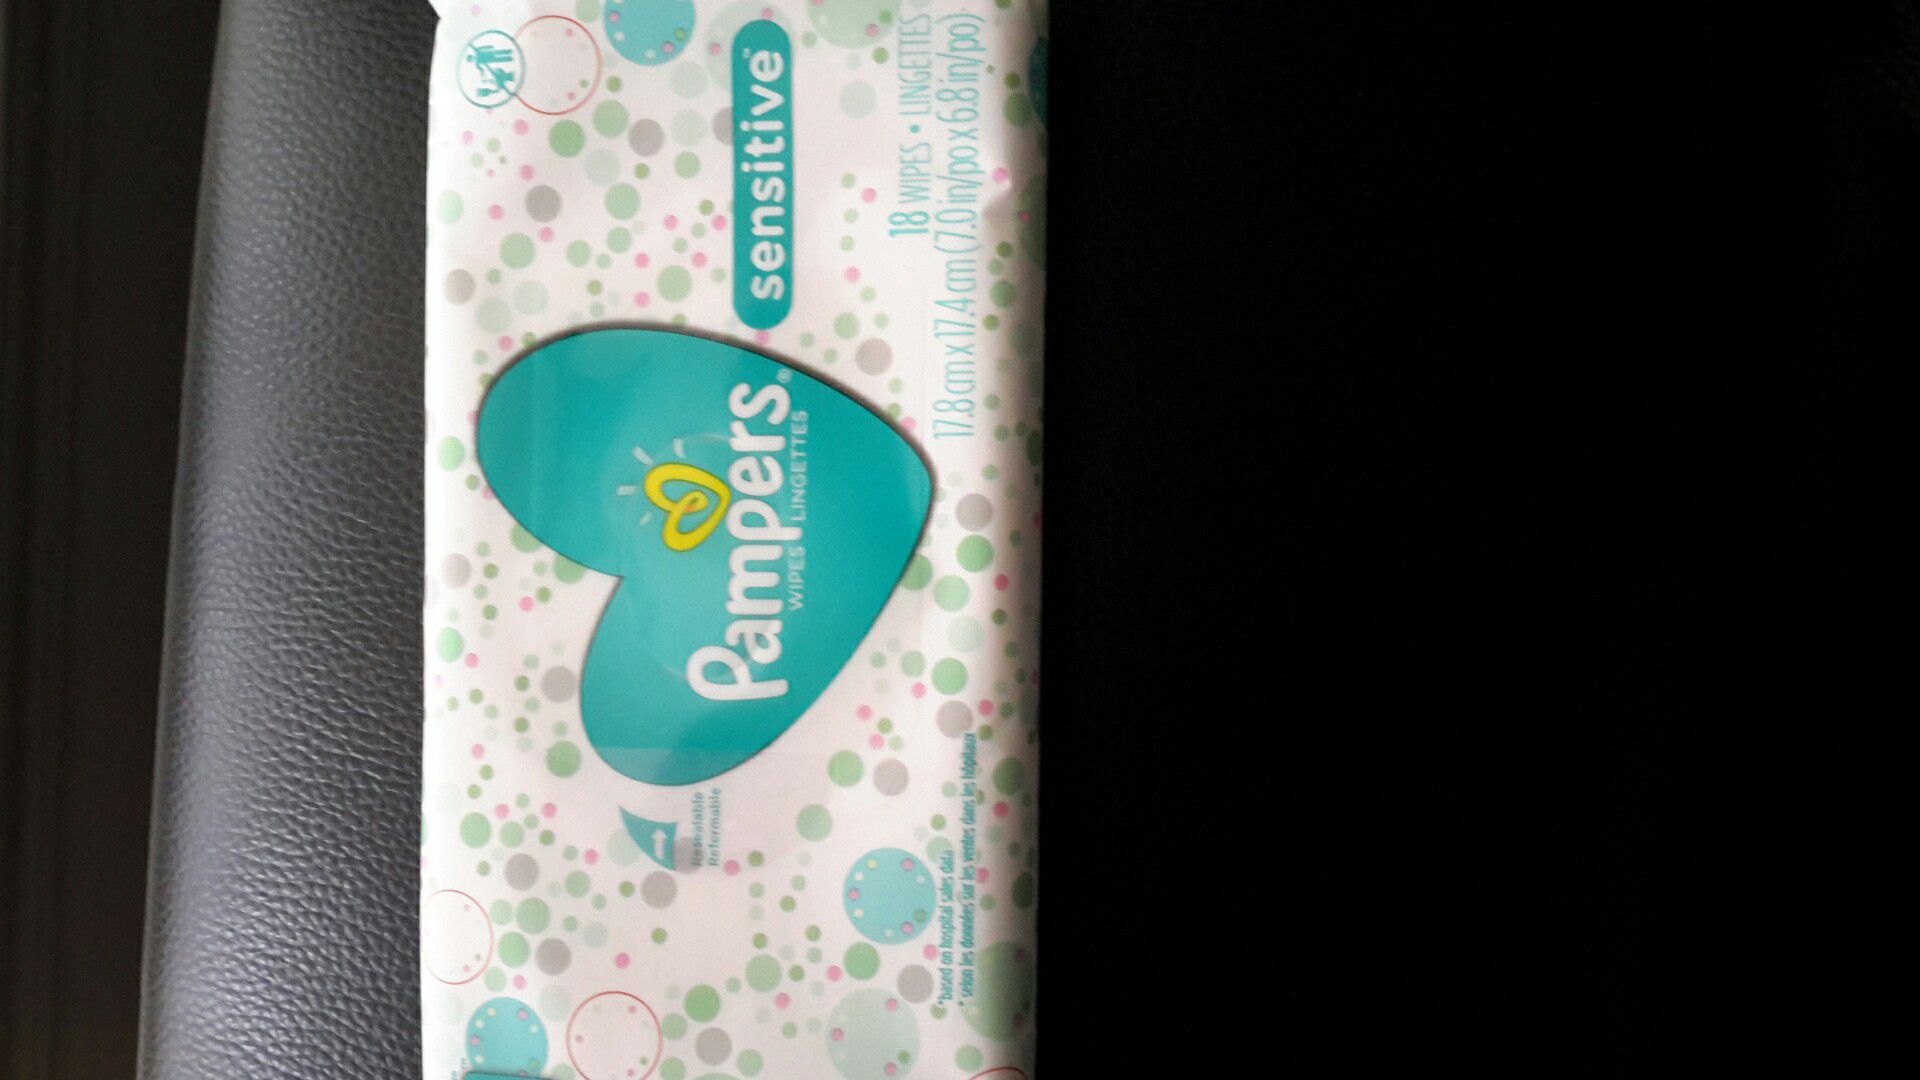 Pampers 18 count baby wipes